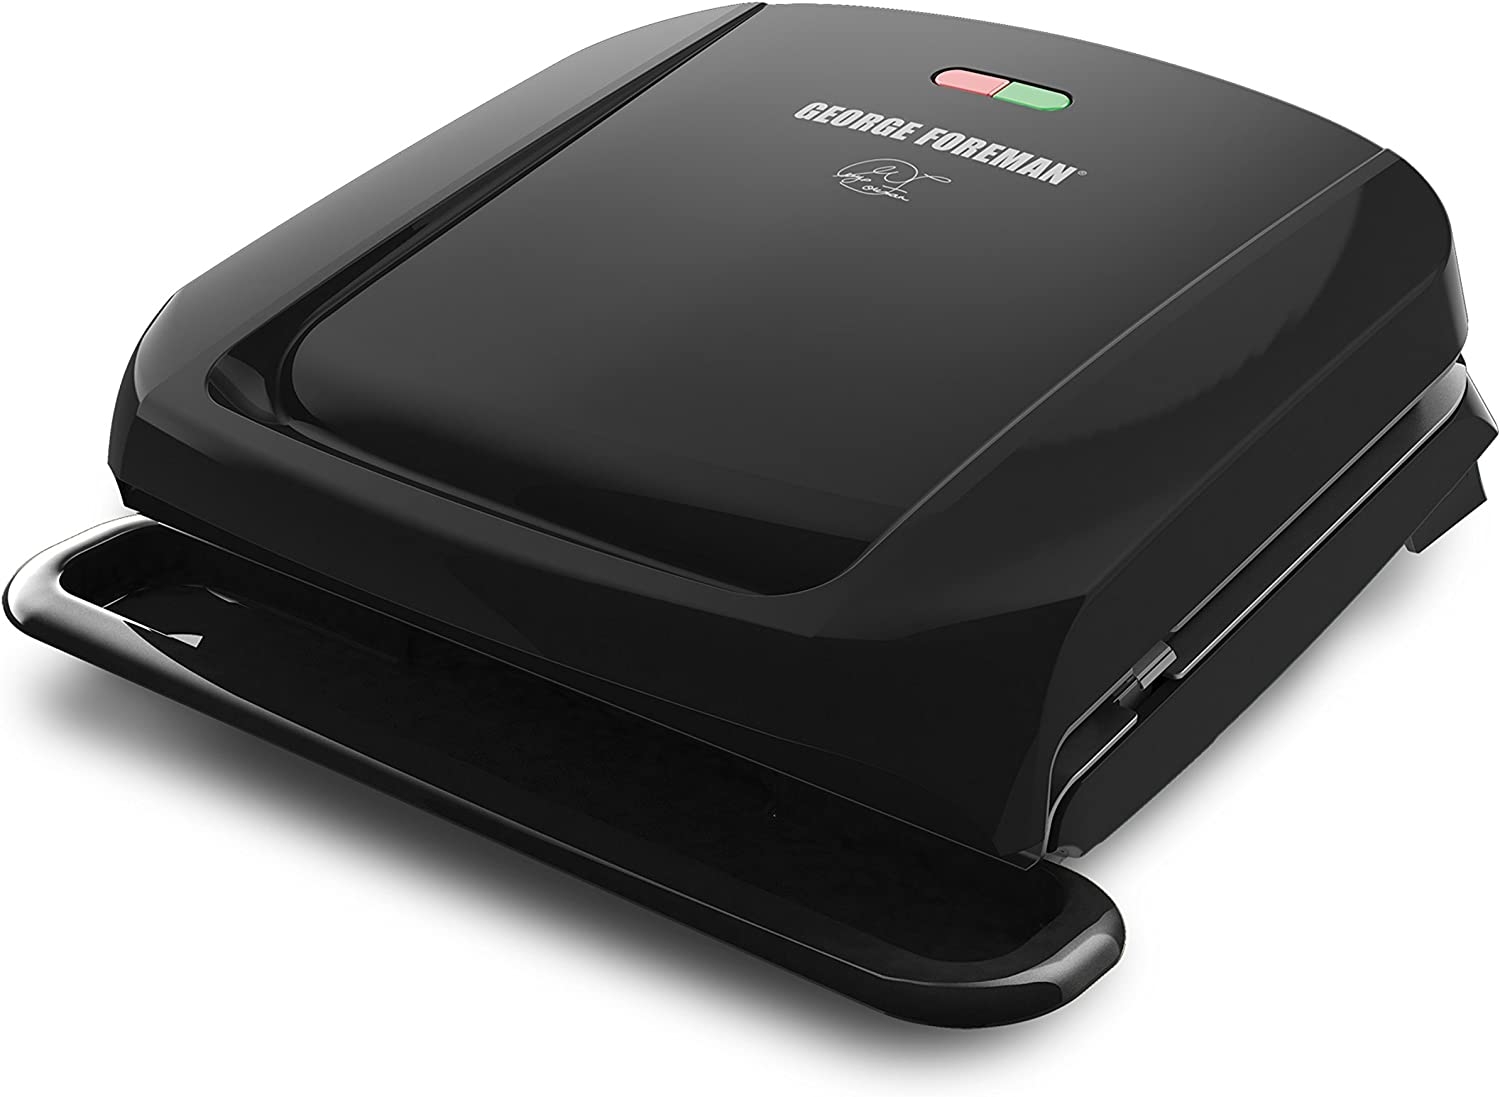 George Foreman 4-Serving Removable Plate Grill and Panini Press, Black, GRP1060B Import To Shop ×Product customization General